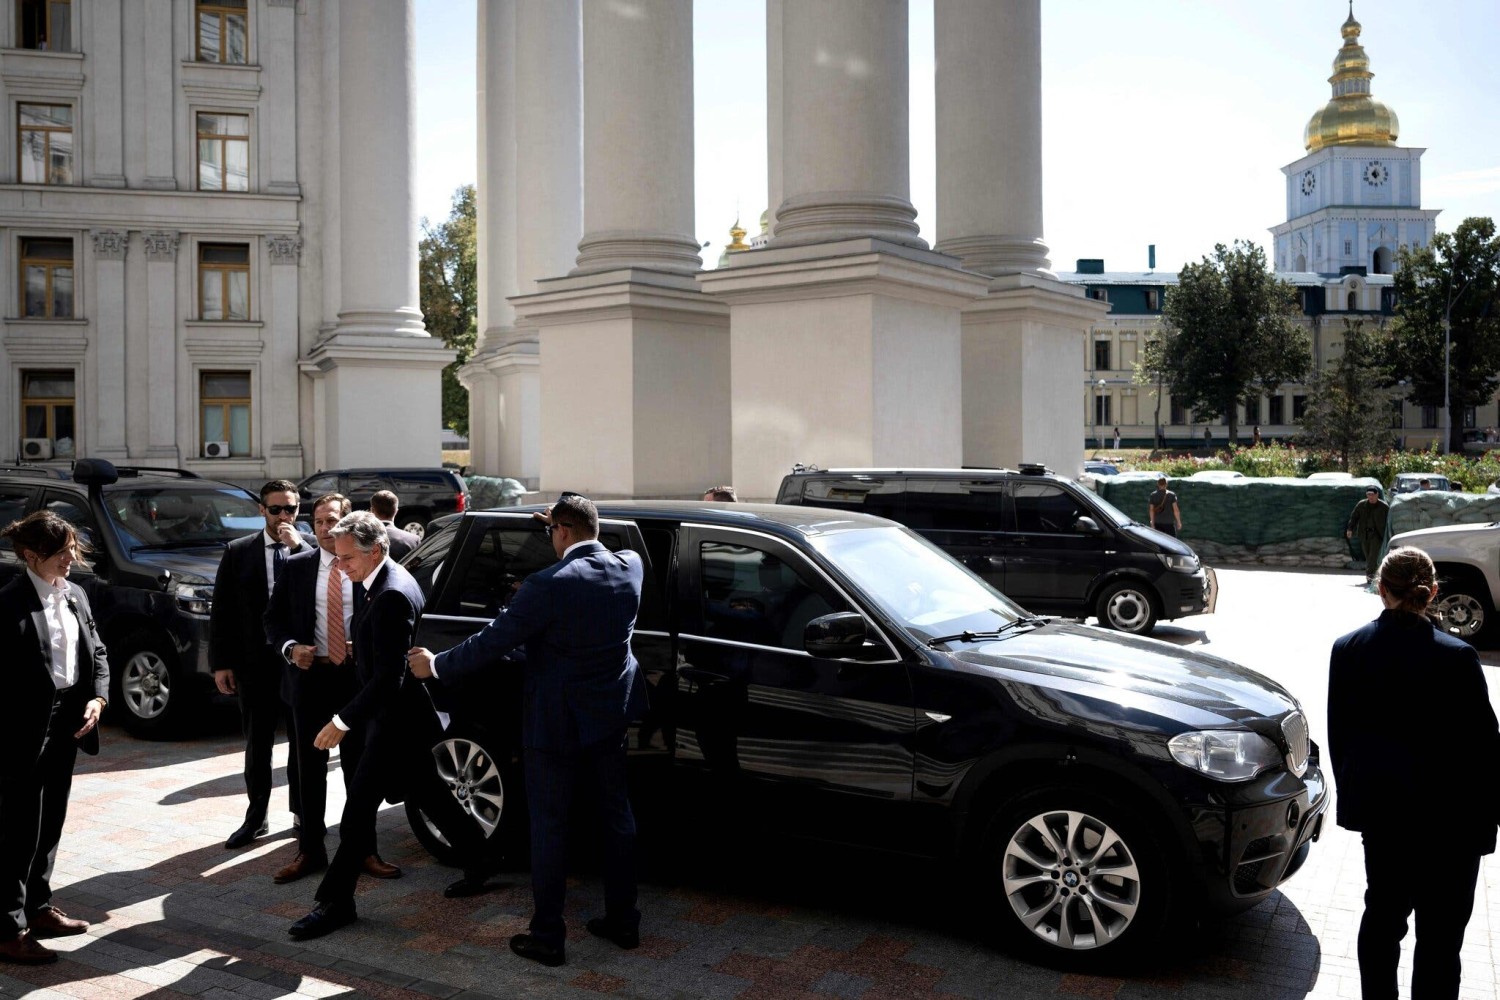 Secretary of State Antony J. Blinken arriving at the Ministry of Foreign Affairs for a meeting with Ukraine’s foreign minister in Kyiv, Ukraine, on Wednesday.Credit...Pool photo by Brendan Smialowski